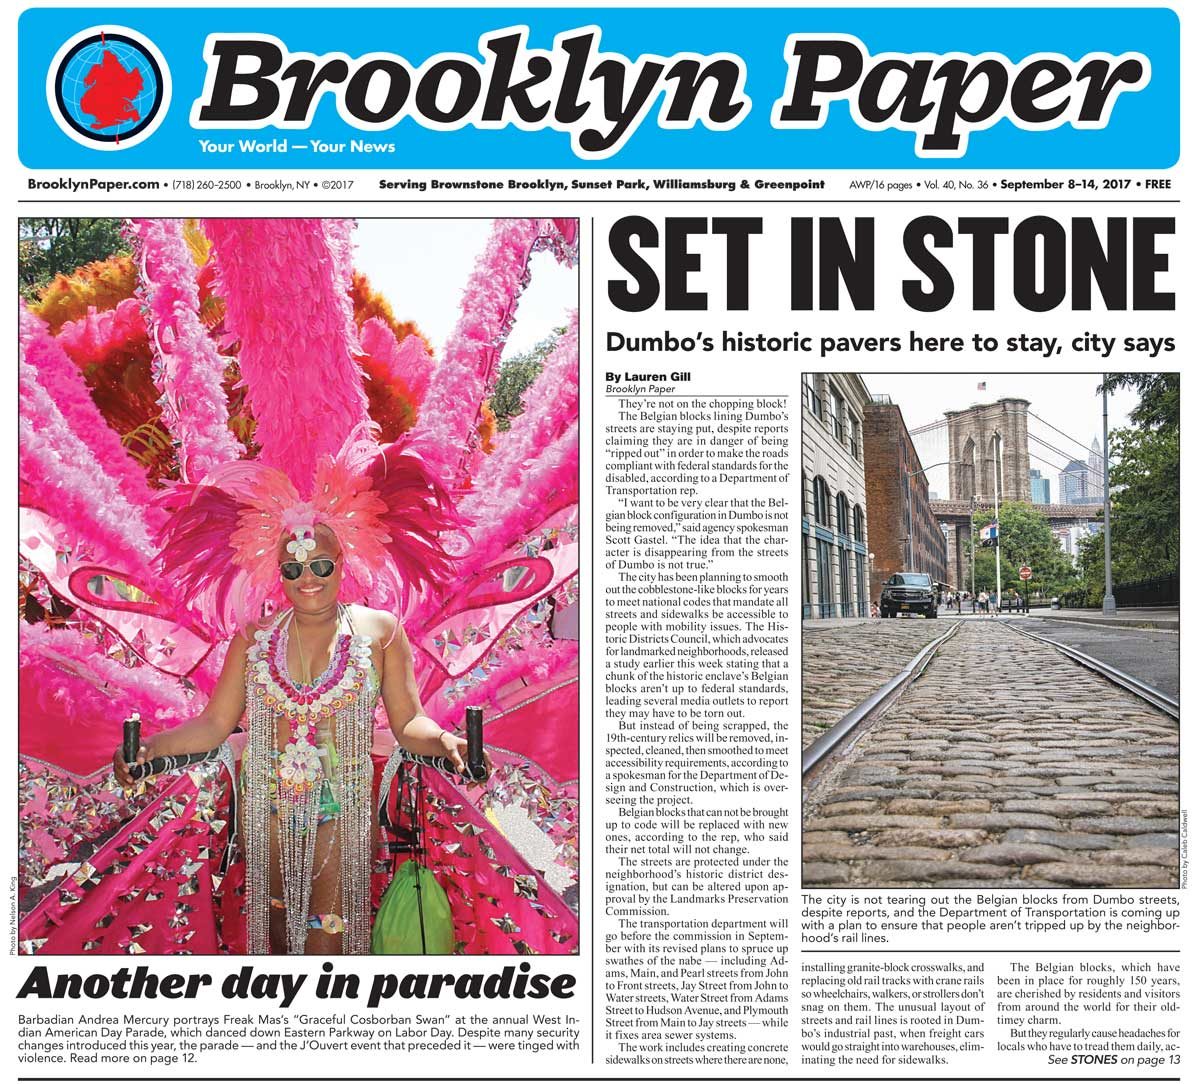 ‘Wood’ working! Brooklyn Paper cited for best headlines in state